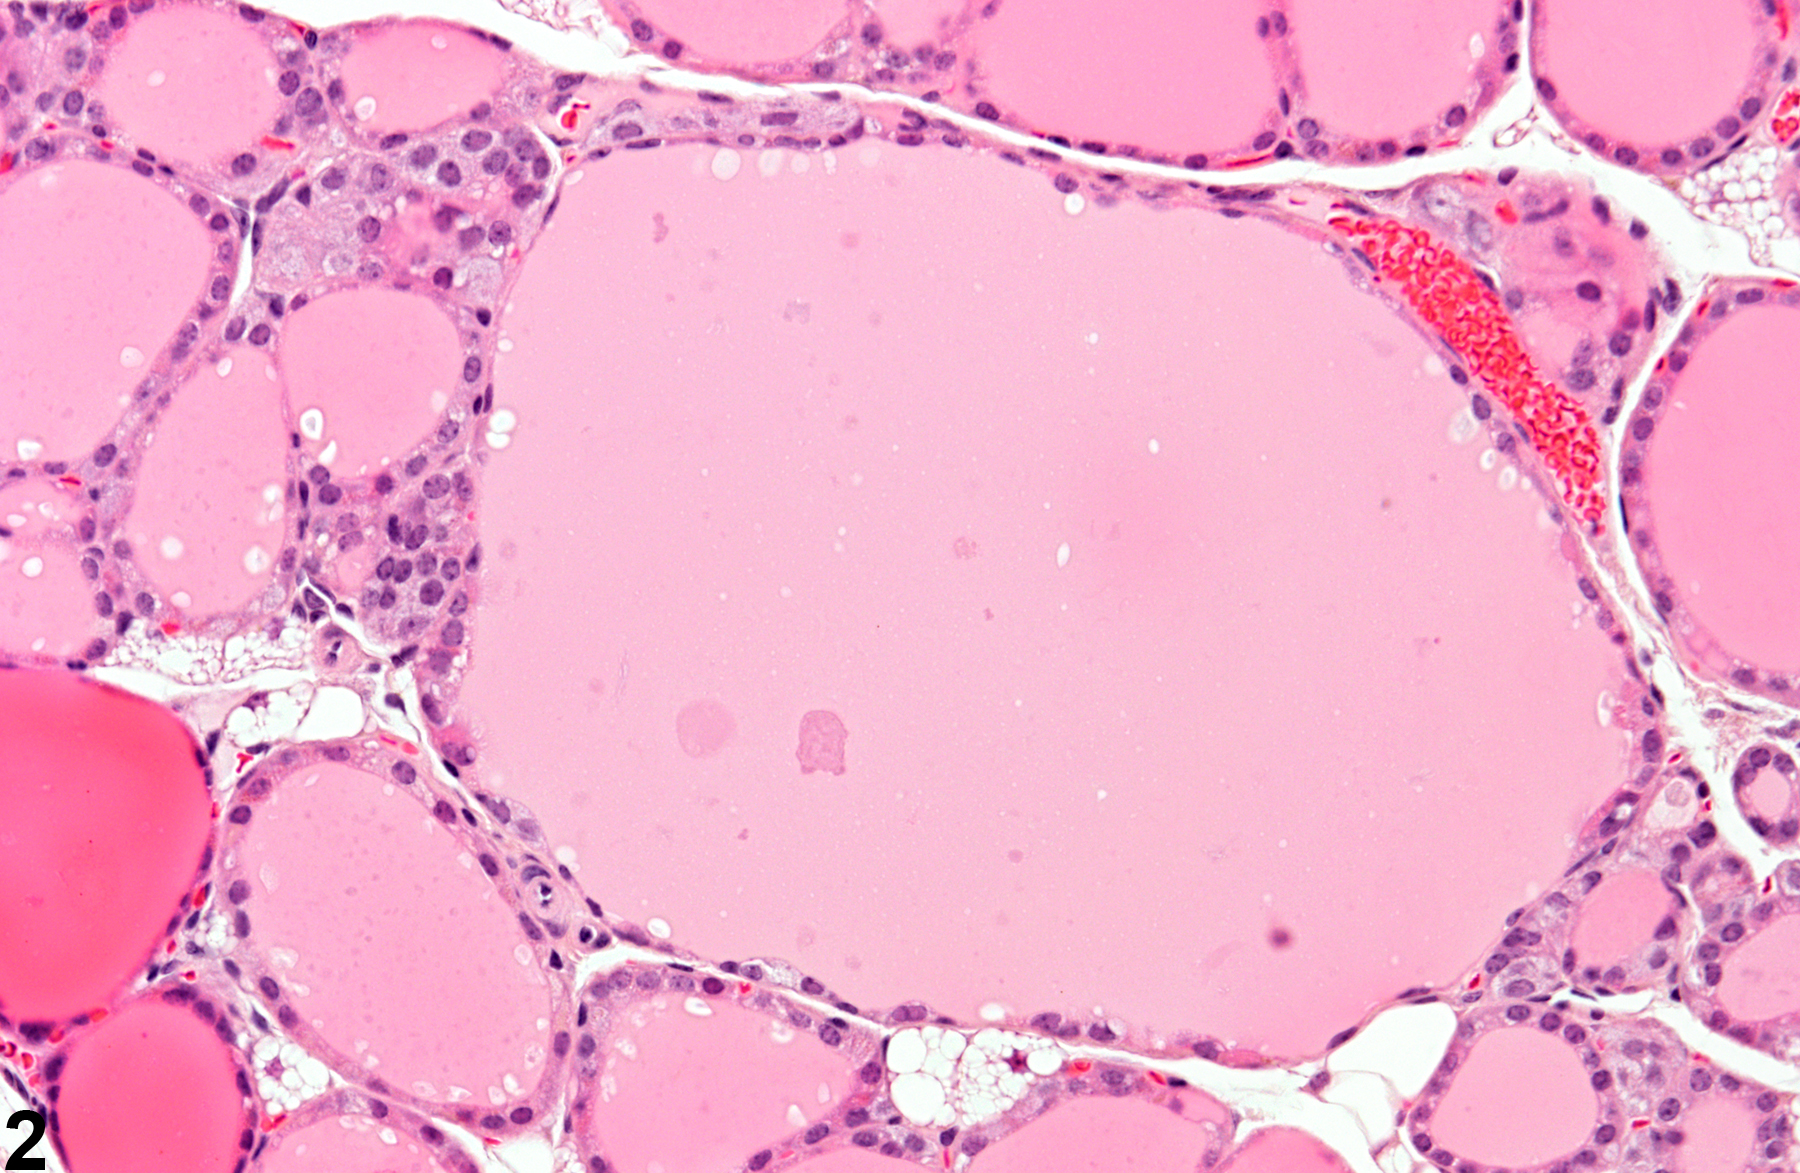 Image of follicle dilation in the thyroid gland from a male B6C3F1 mouse in a chronic study